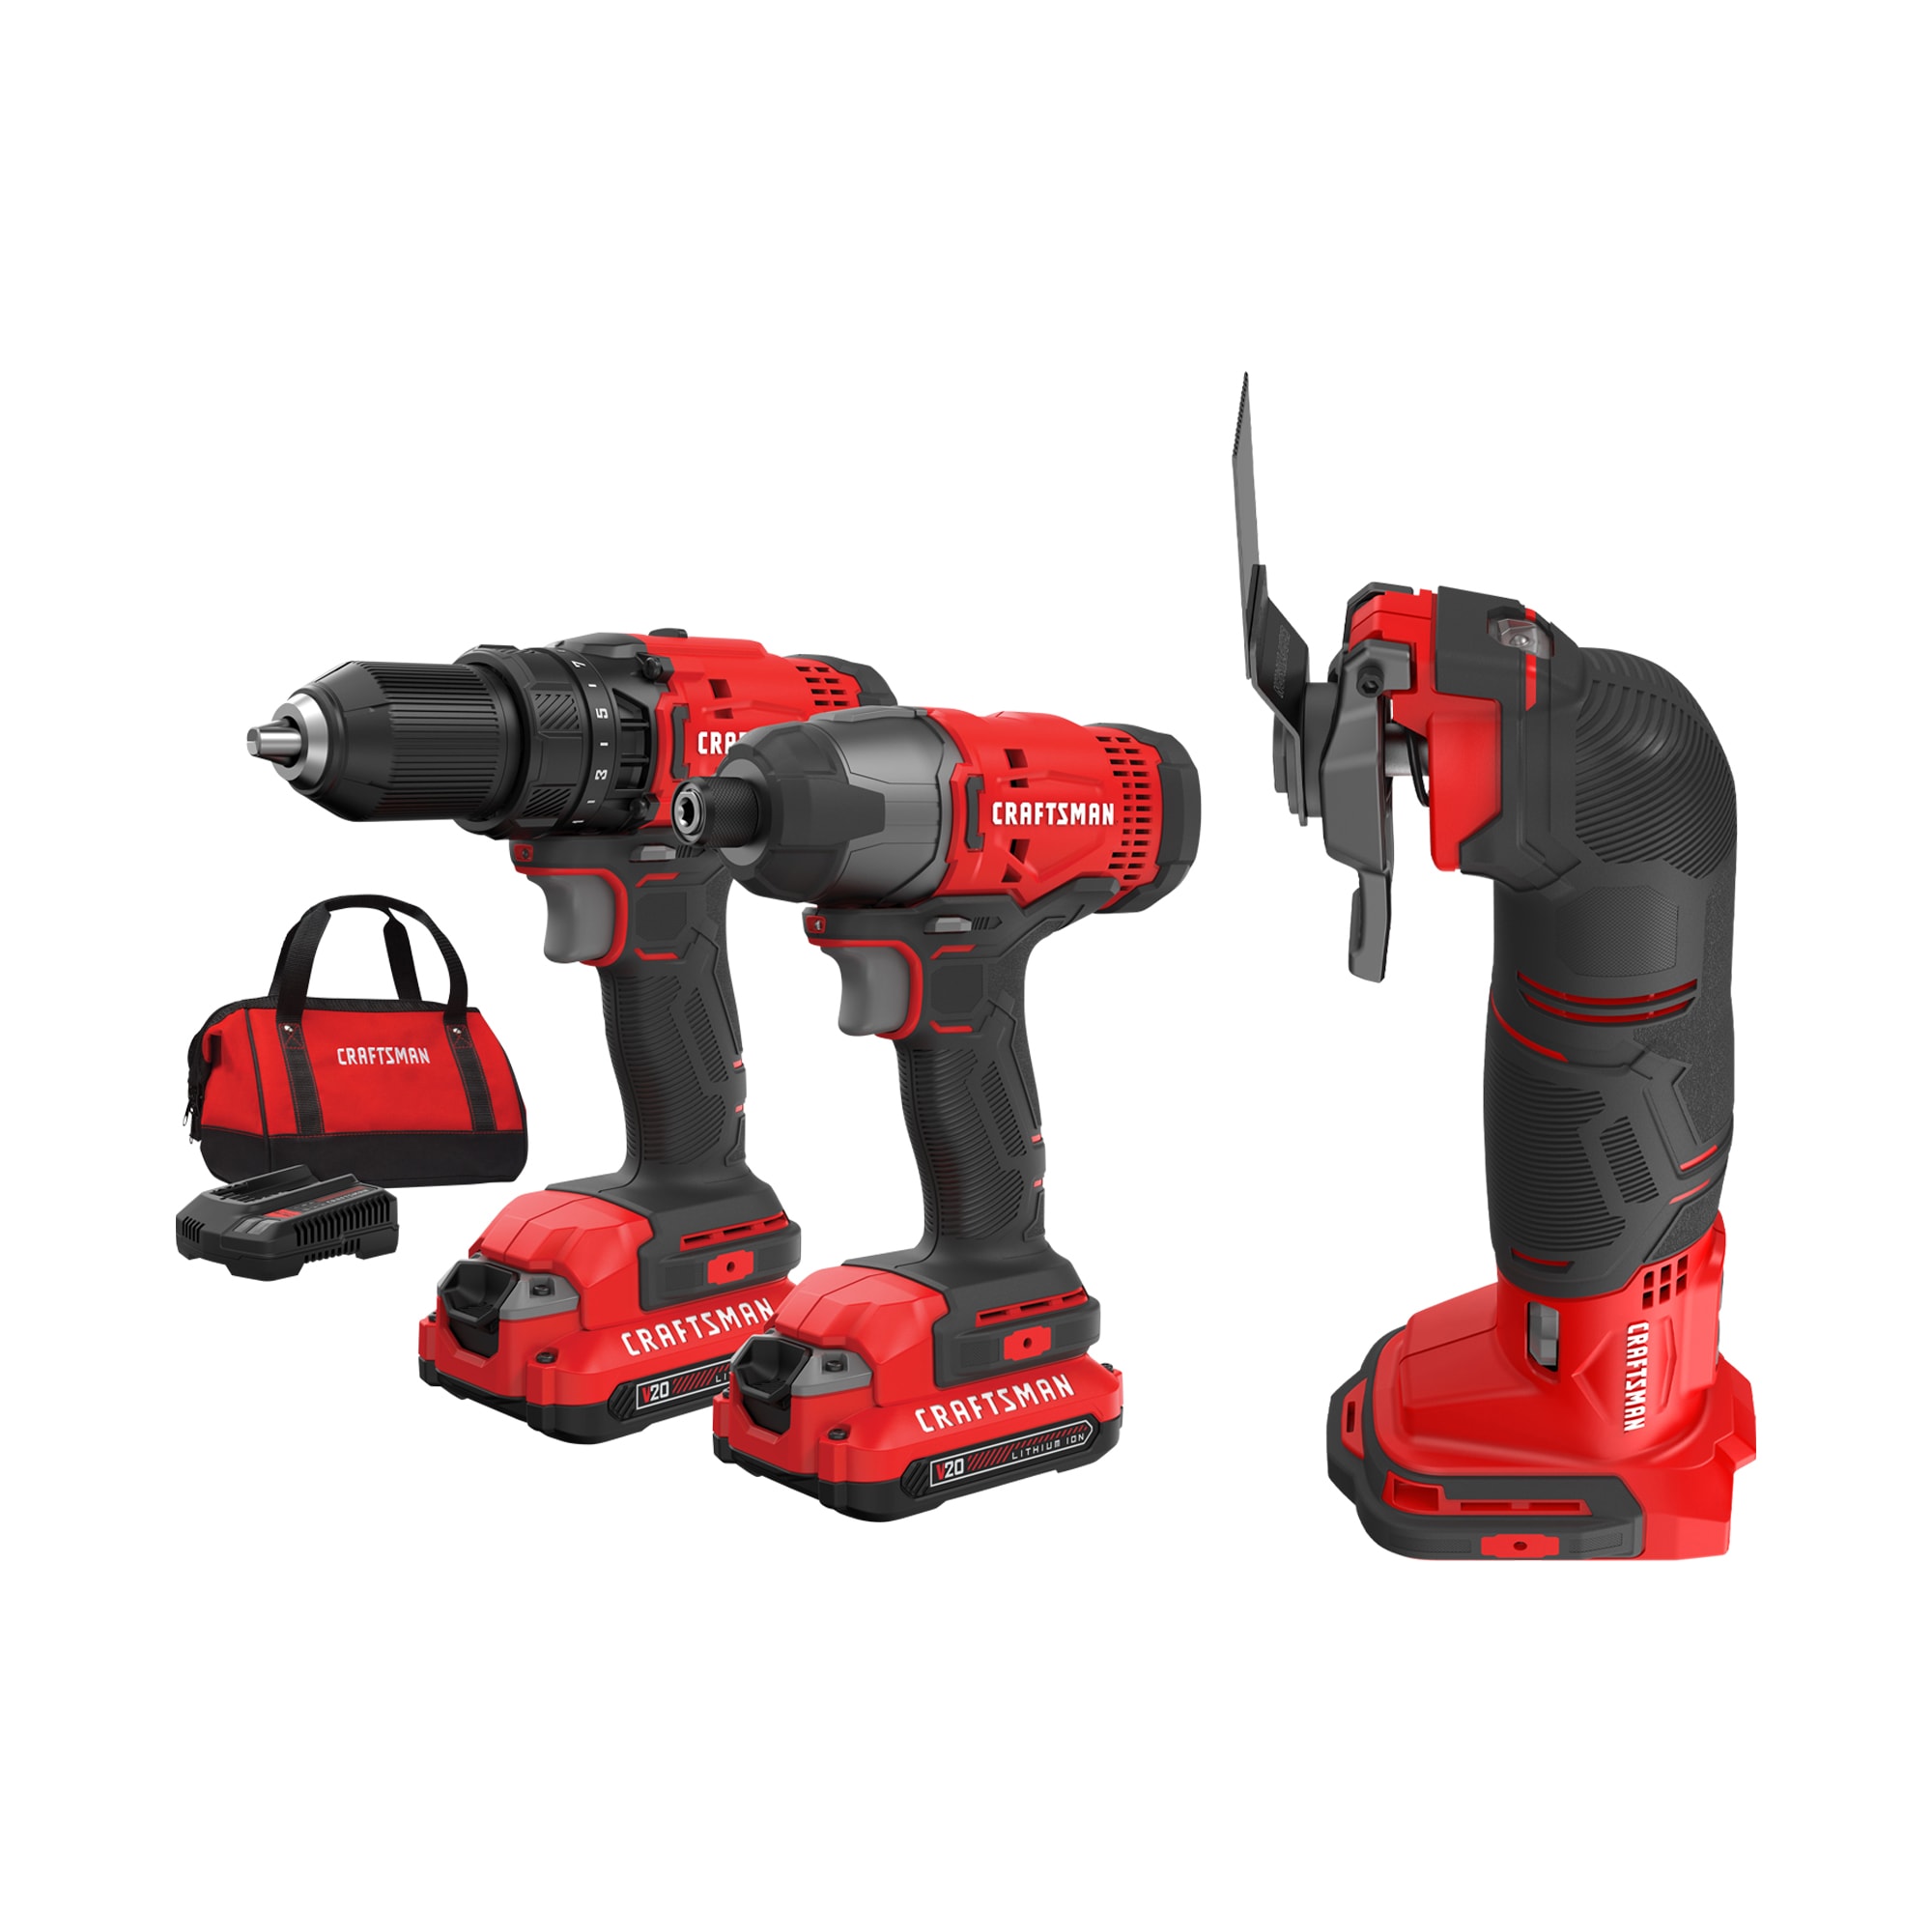 CRAFTSMAN V20* 2-Tool 20-Volt Power Tool Combo Kit with Soft Case (2-Batteries Included and Charger Included) & V20* 12-Piece 20-volt Variable Speed